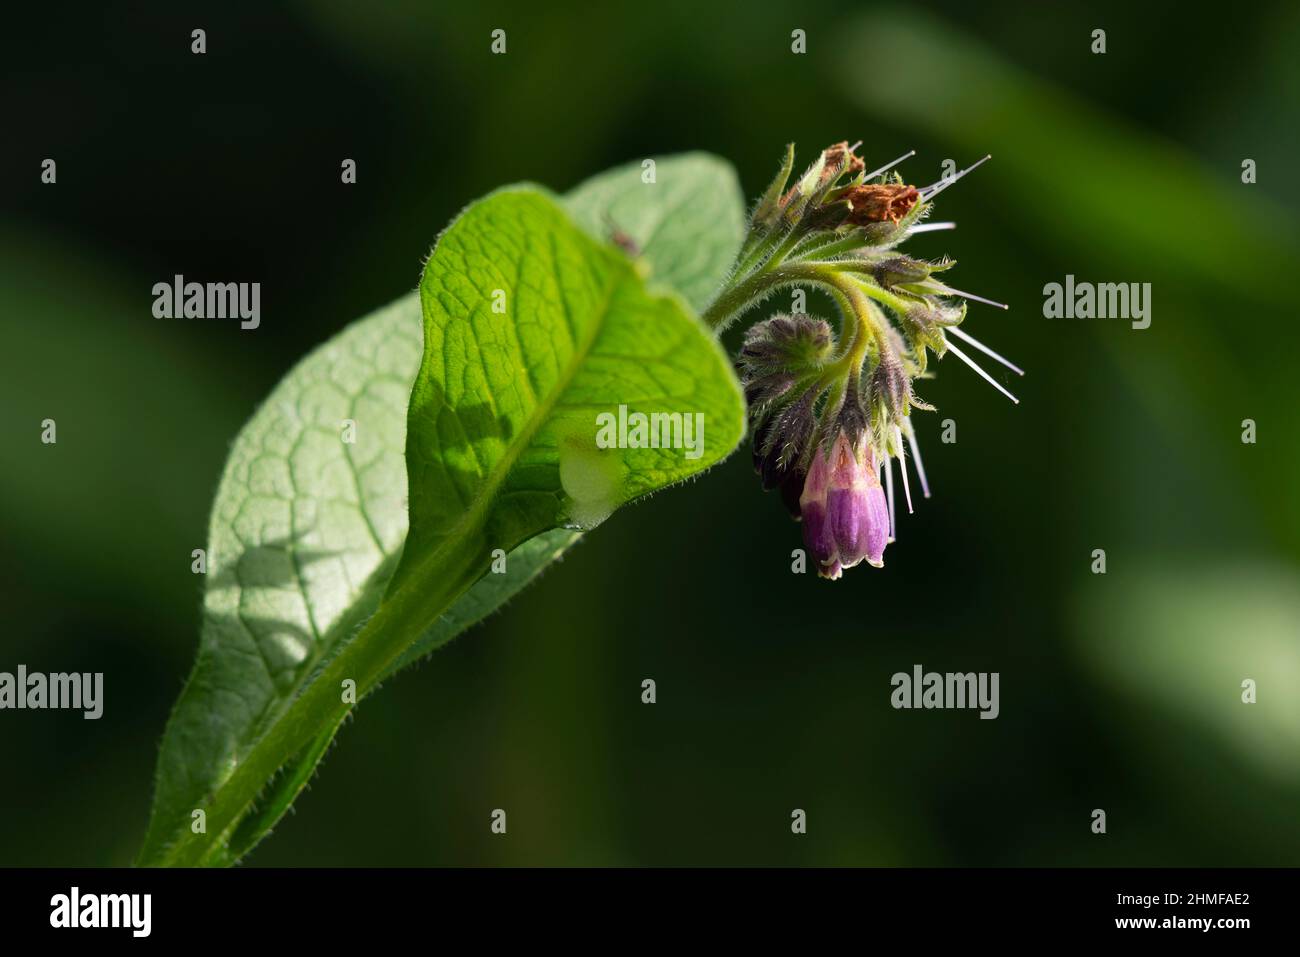 A Flower Head of Russian Comfrey (Symphytum x Uplandicum) Showing the Calyx, Purple Corolla and a Spiral of Styles Stock Photo